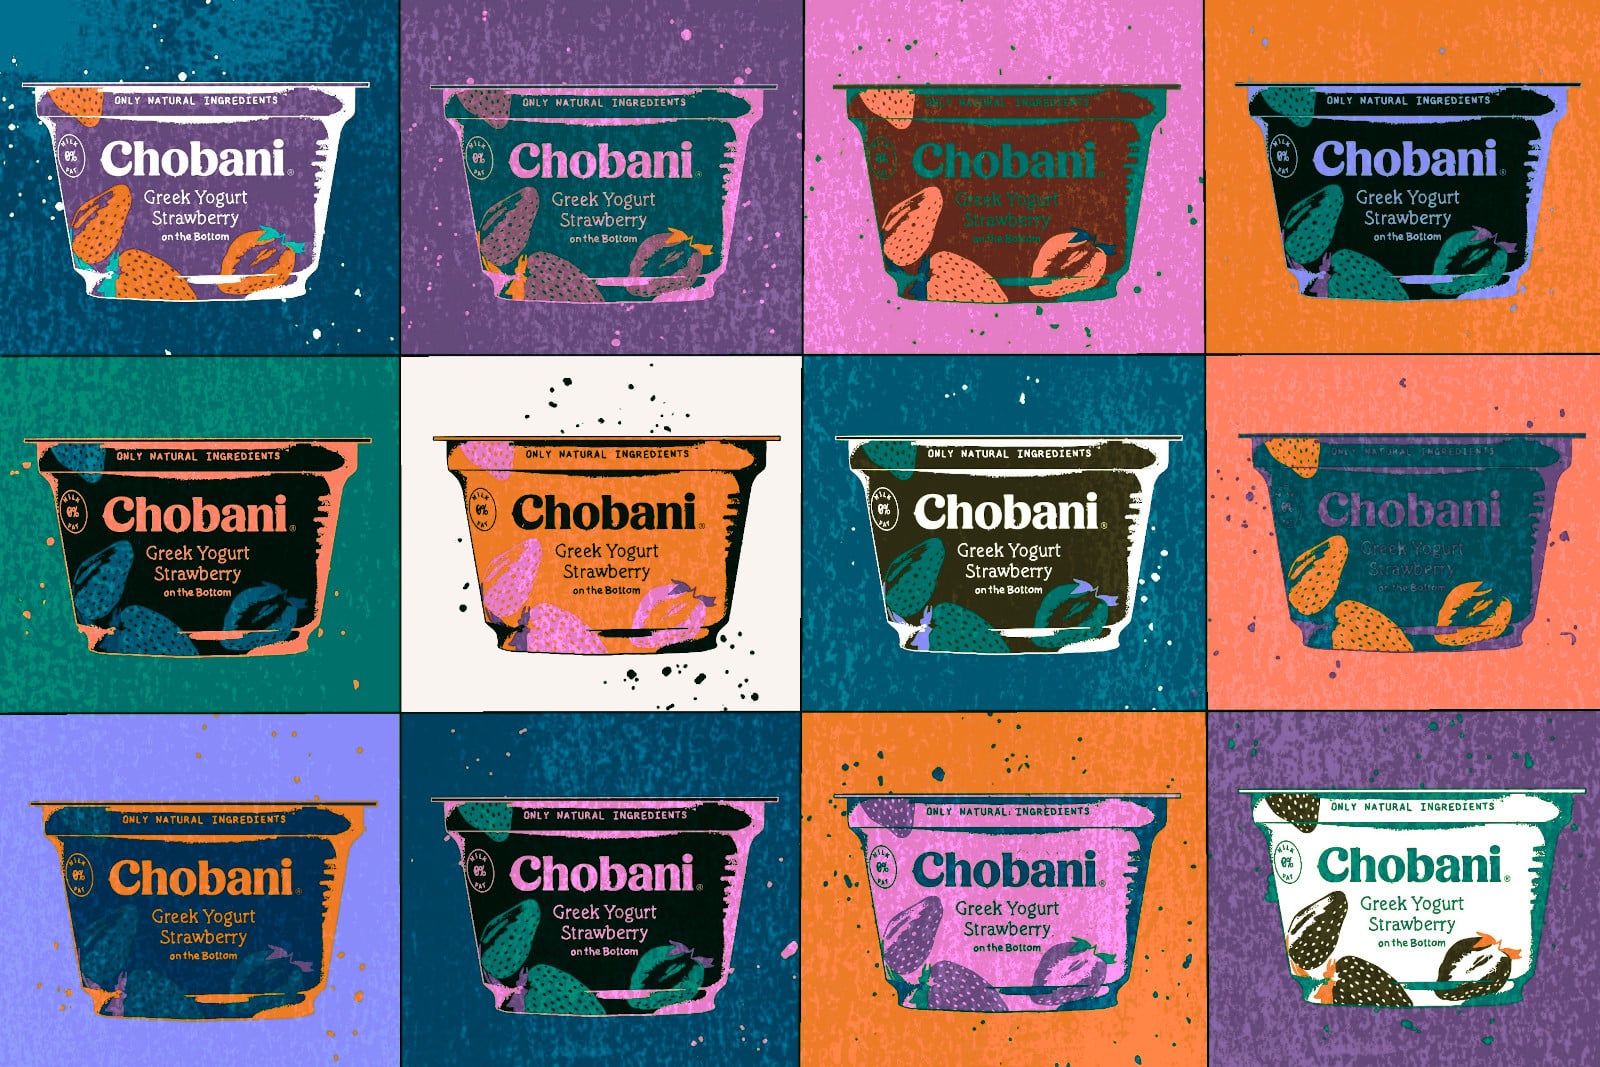 Chat with Colleen Campbell of Chobani